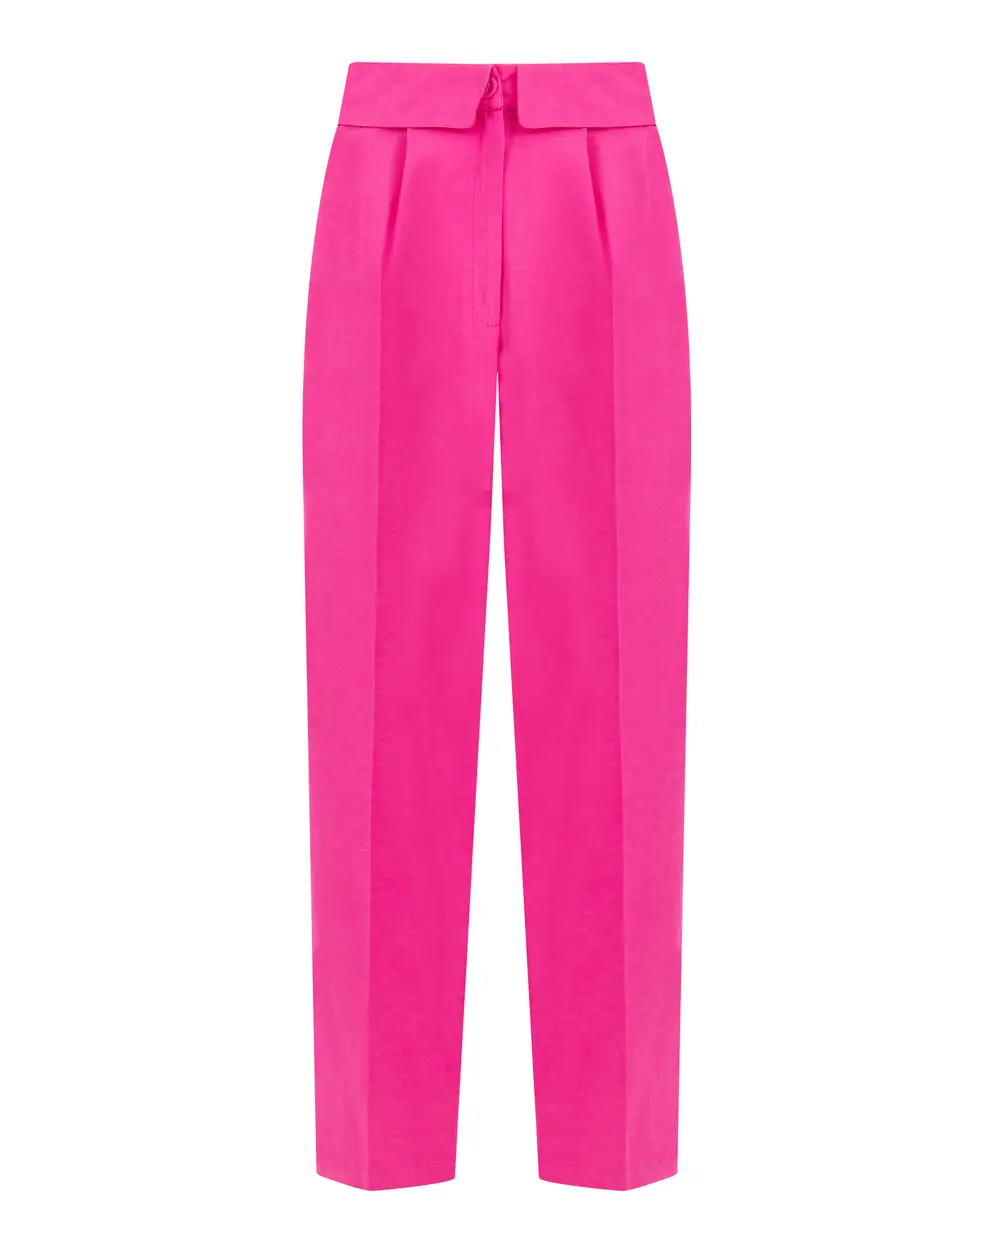 Waist Detailed Pleated Wide Cut Trousers